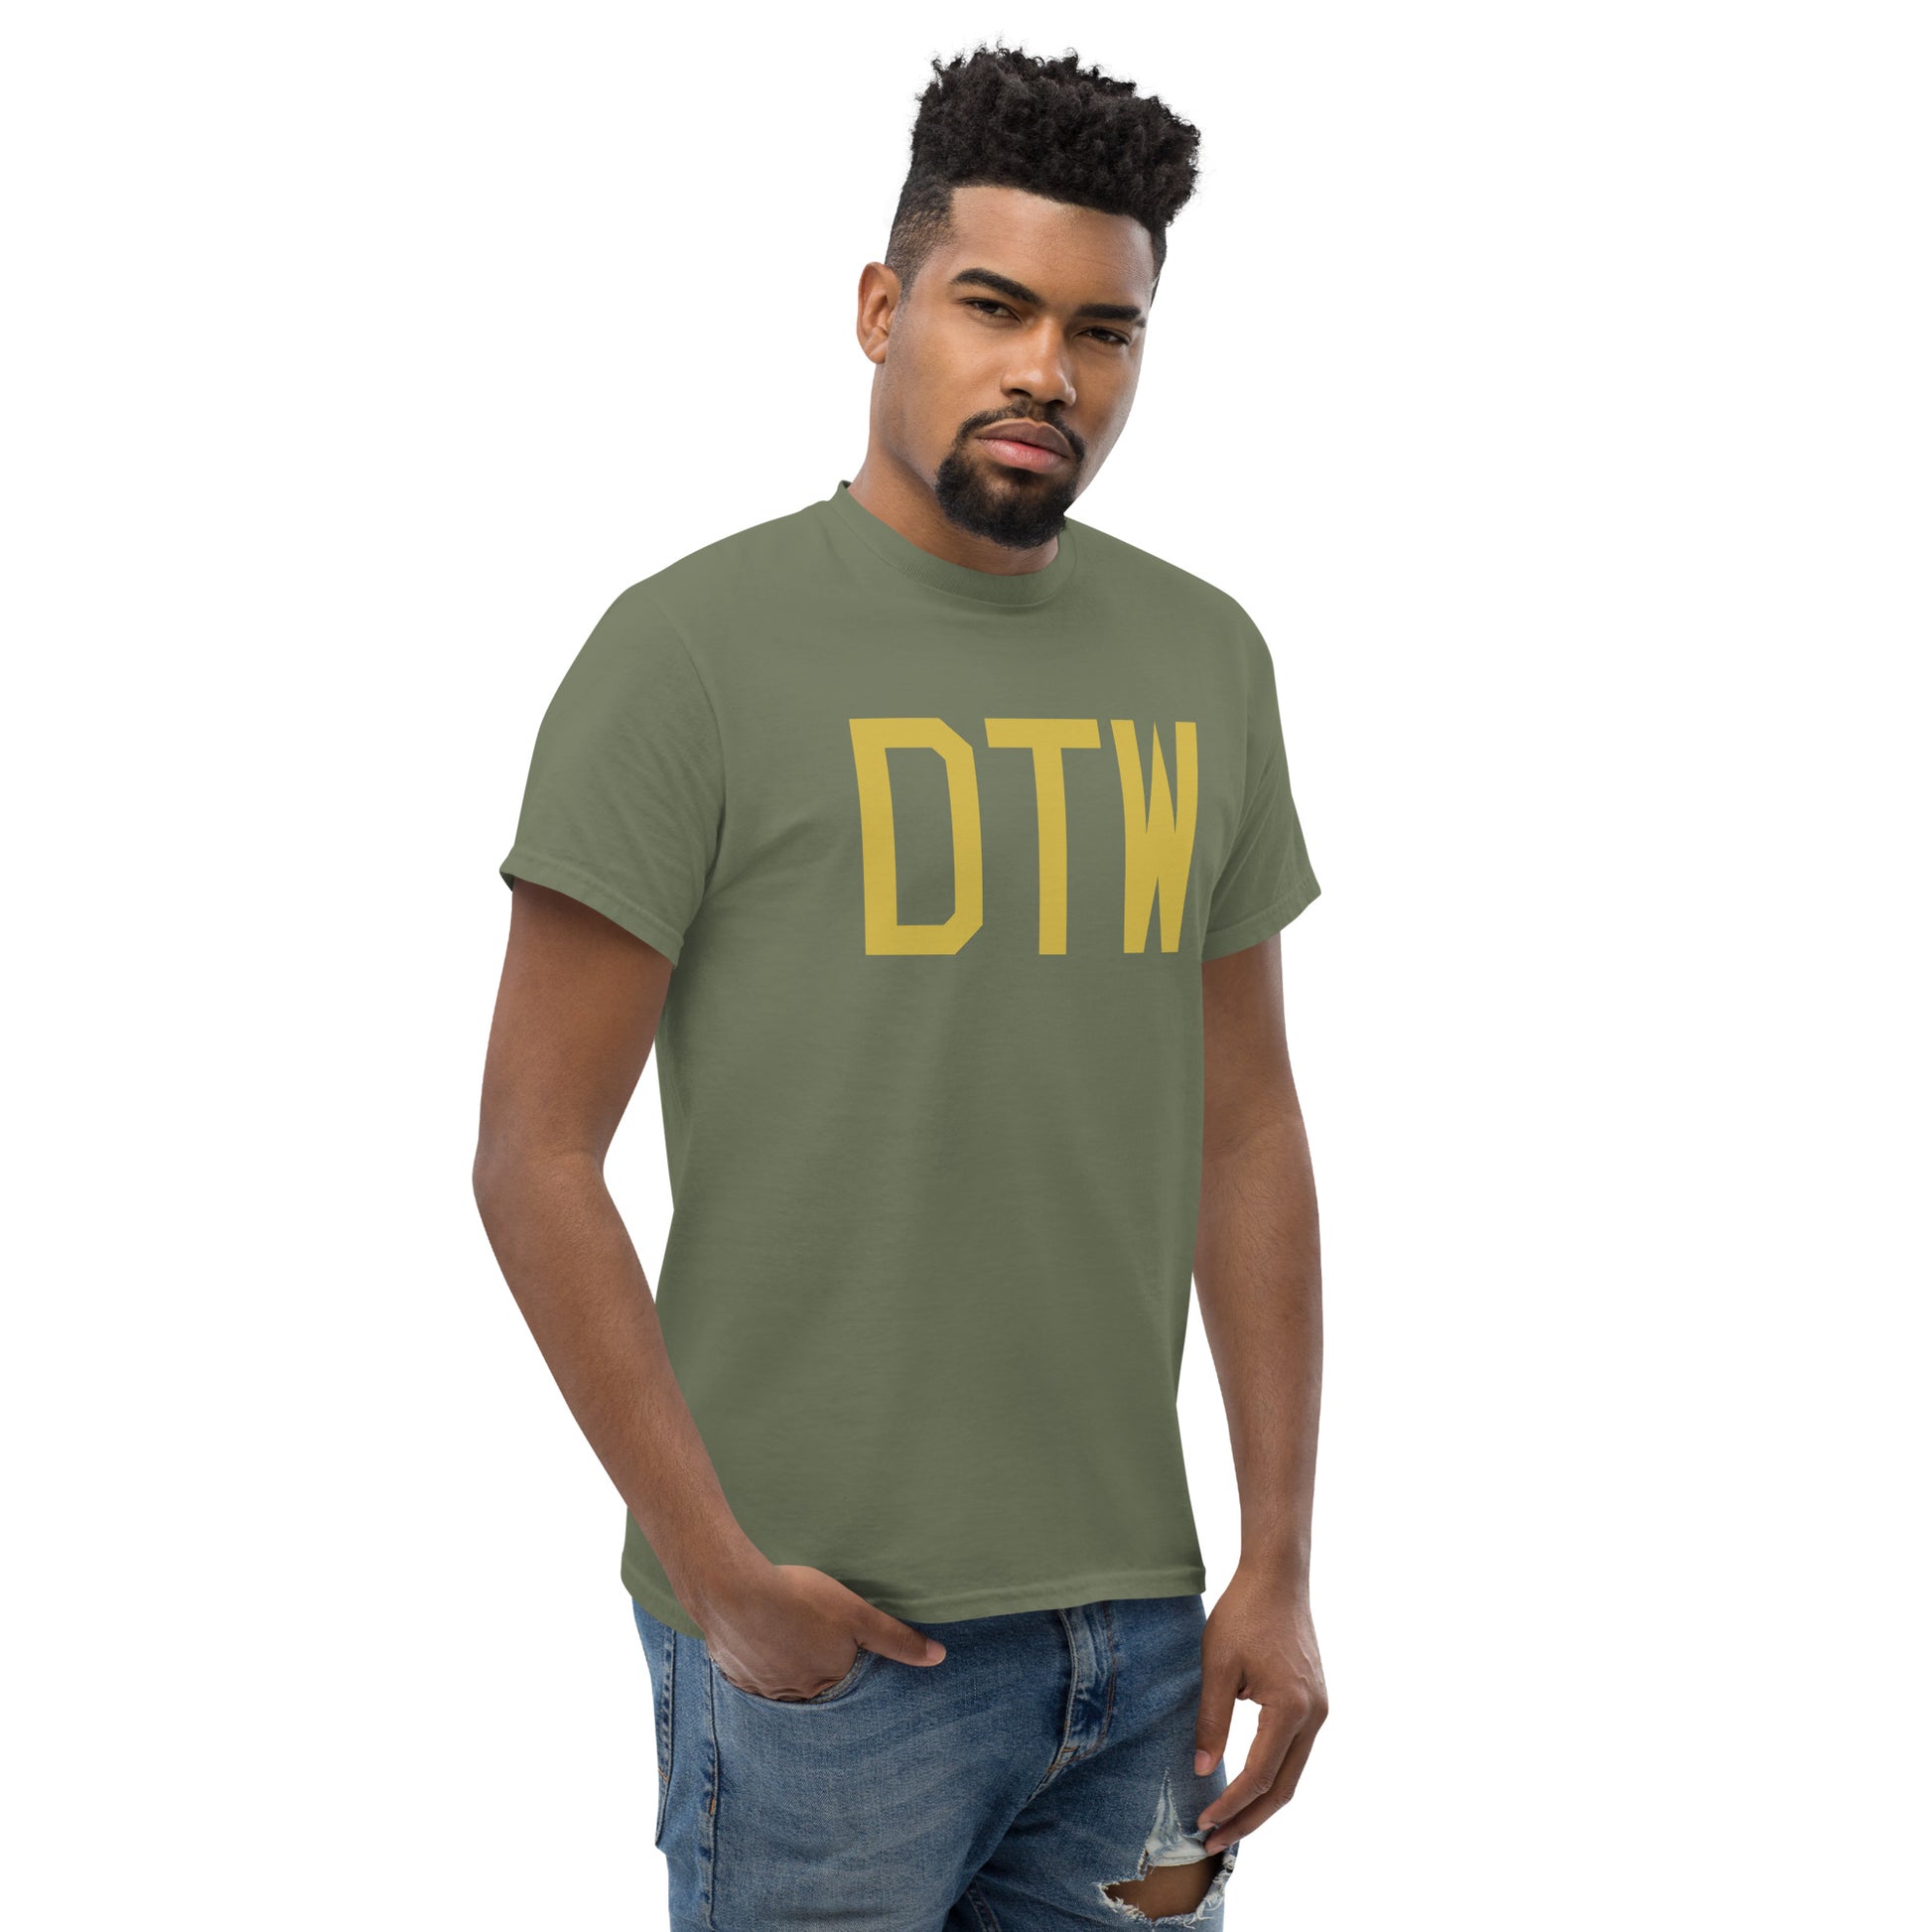 Aviation Enthusiast Men's Tee - Old Gold Graphic • DTW Detroit • YHM Designs - Image 08